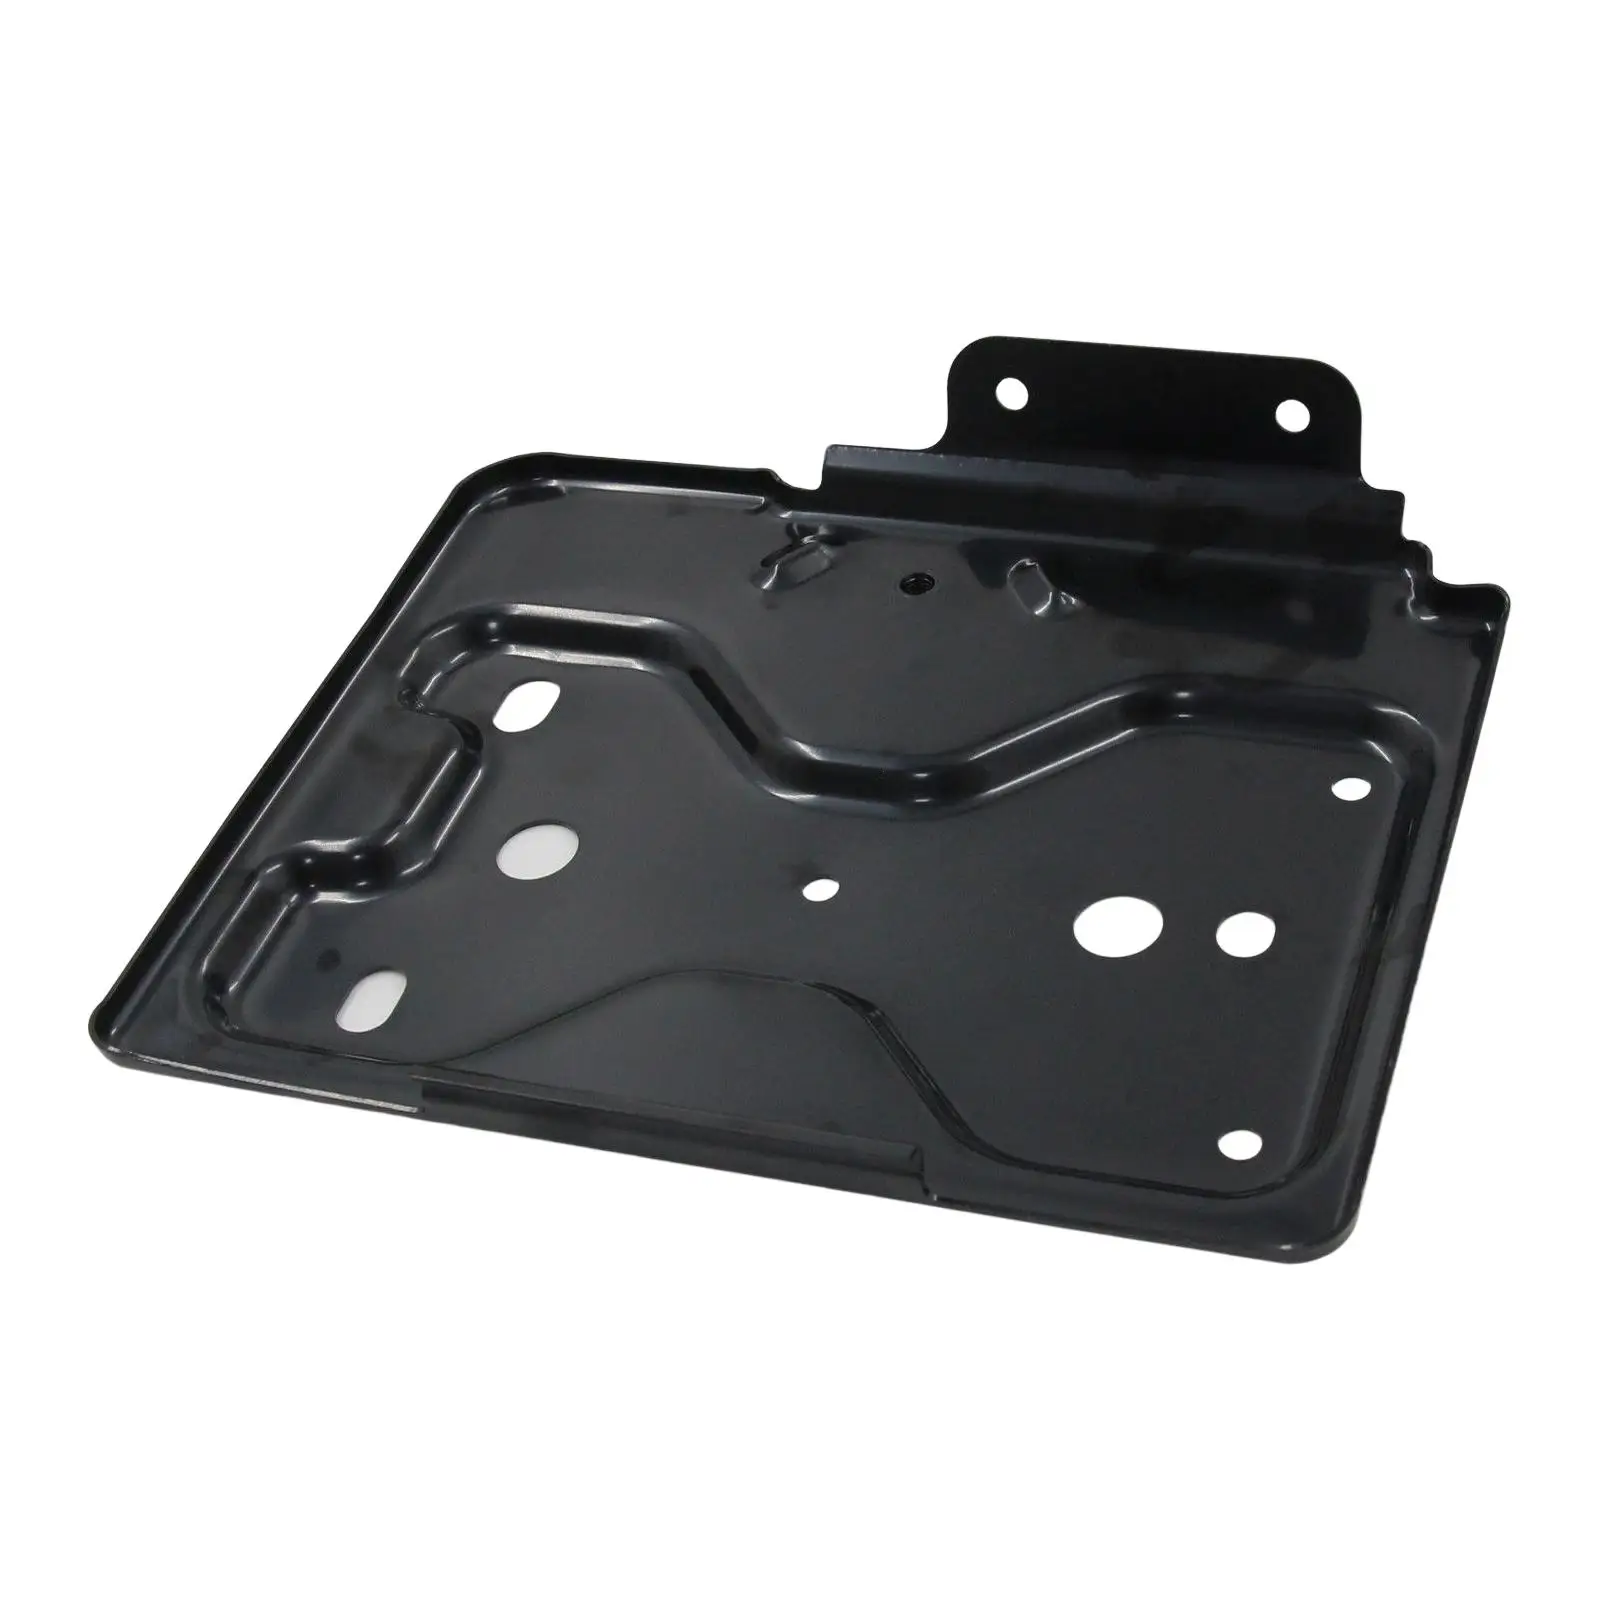 Battery Tray Easy to Install Premium Durable High Performance Replaces Car Accessories for Chevrolet Silverado 1500